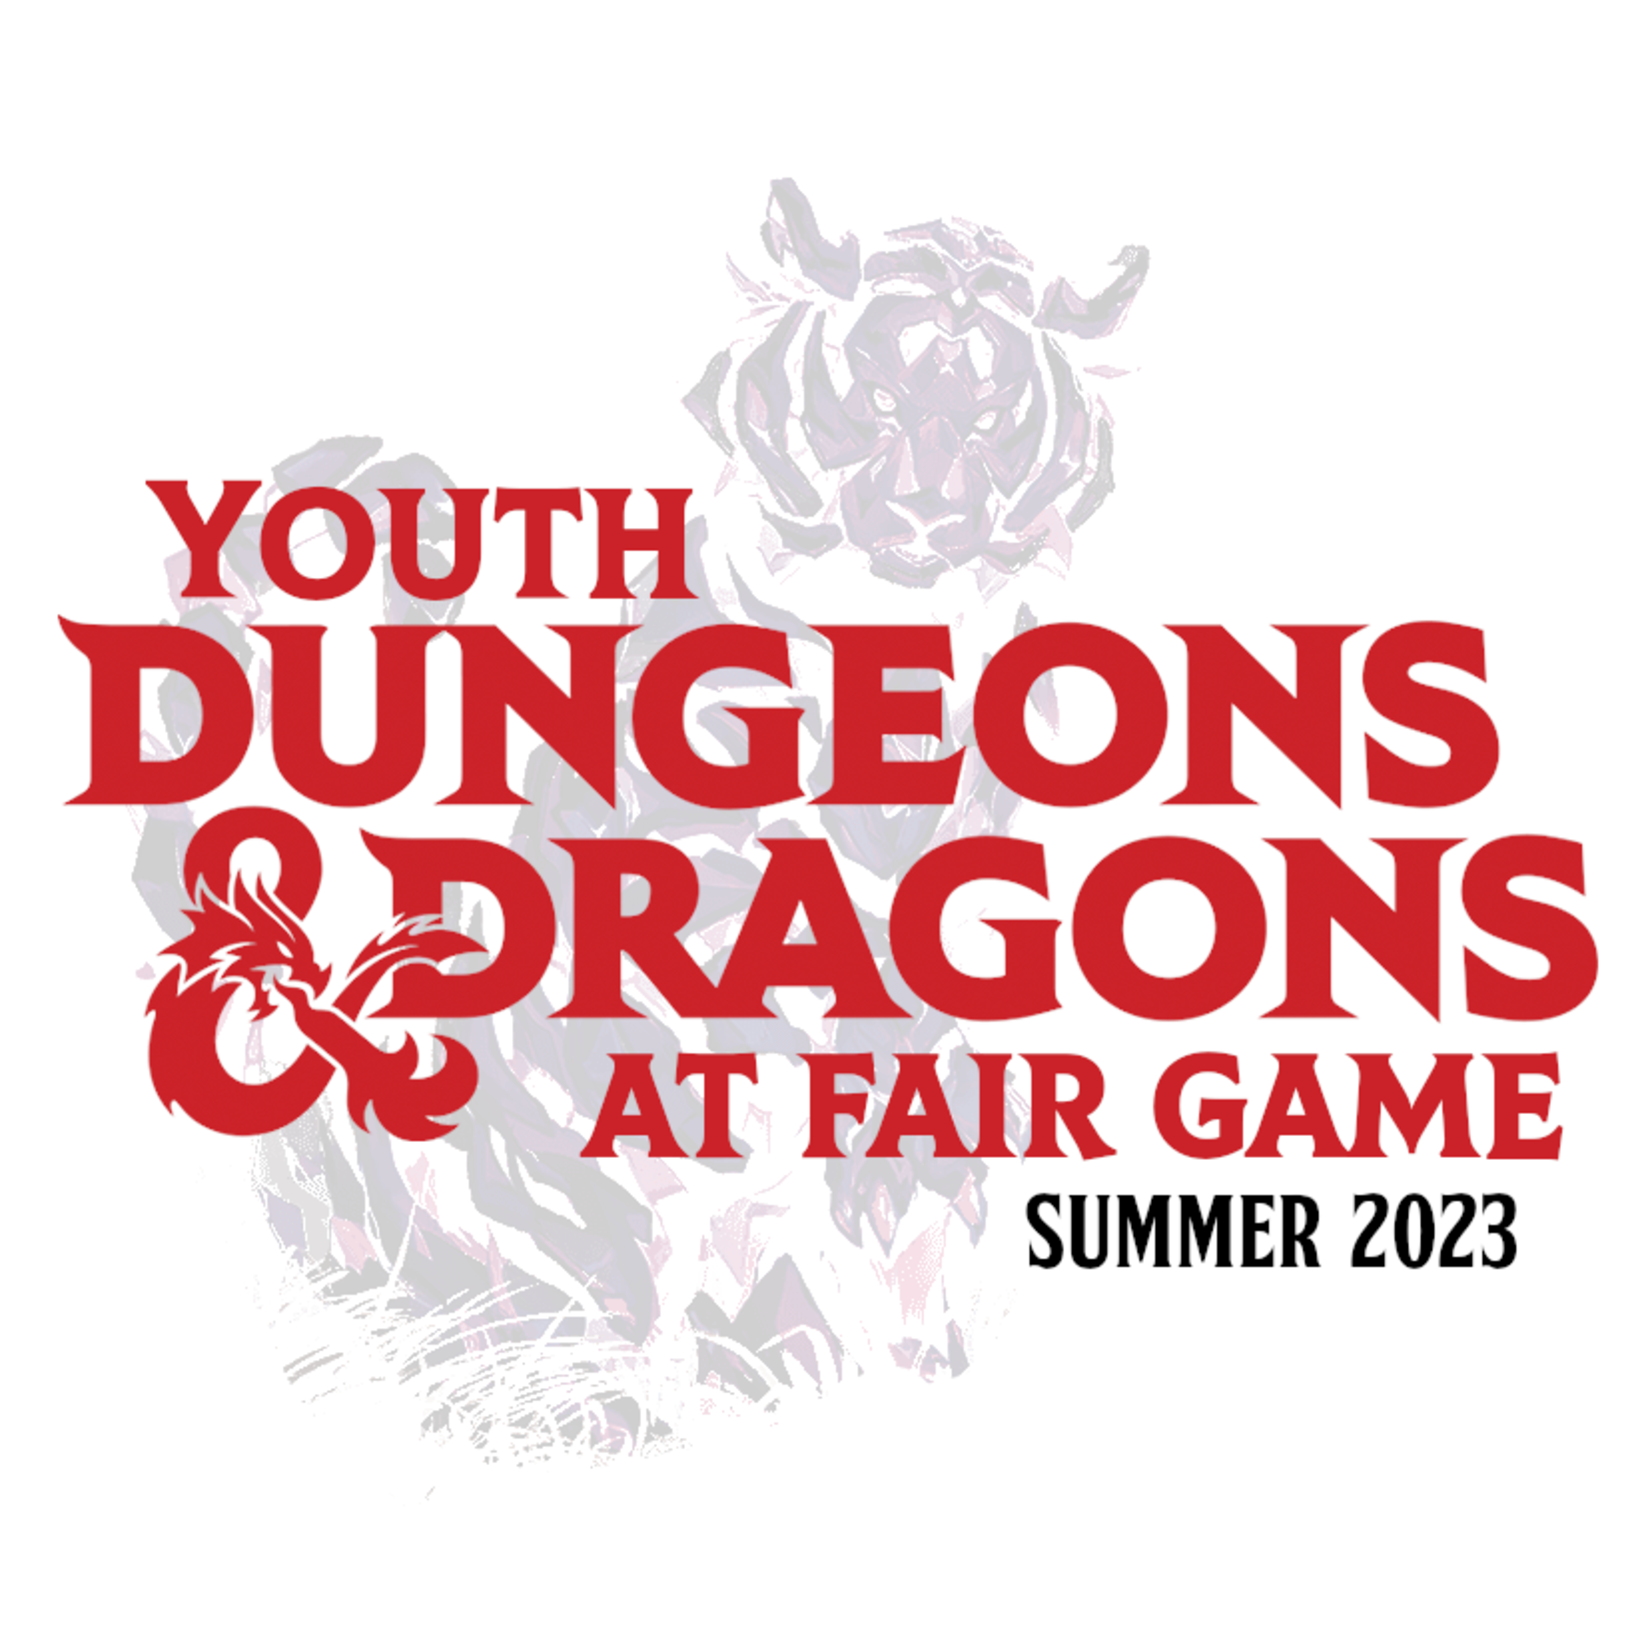 Fair Game YDND Summer 2023: Group DF4 - Friday Downers Grove 7-9 PM CST (Ages 13-17)